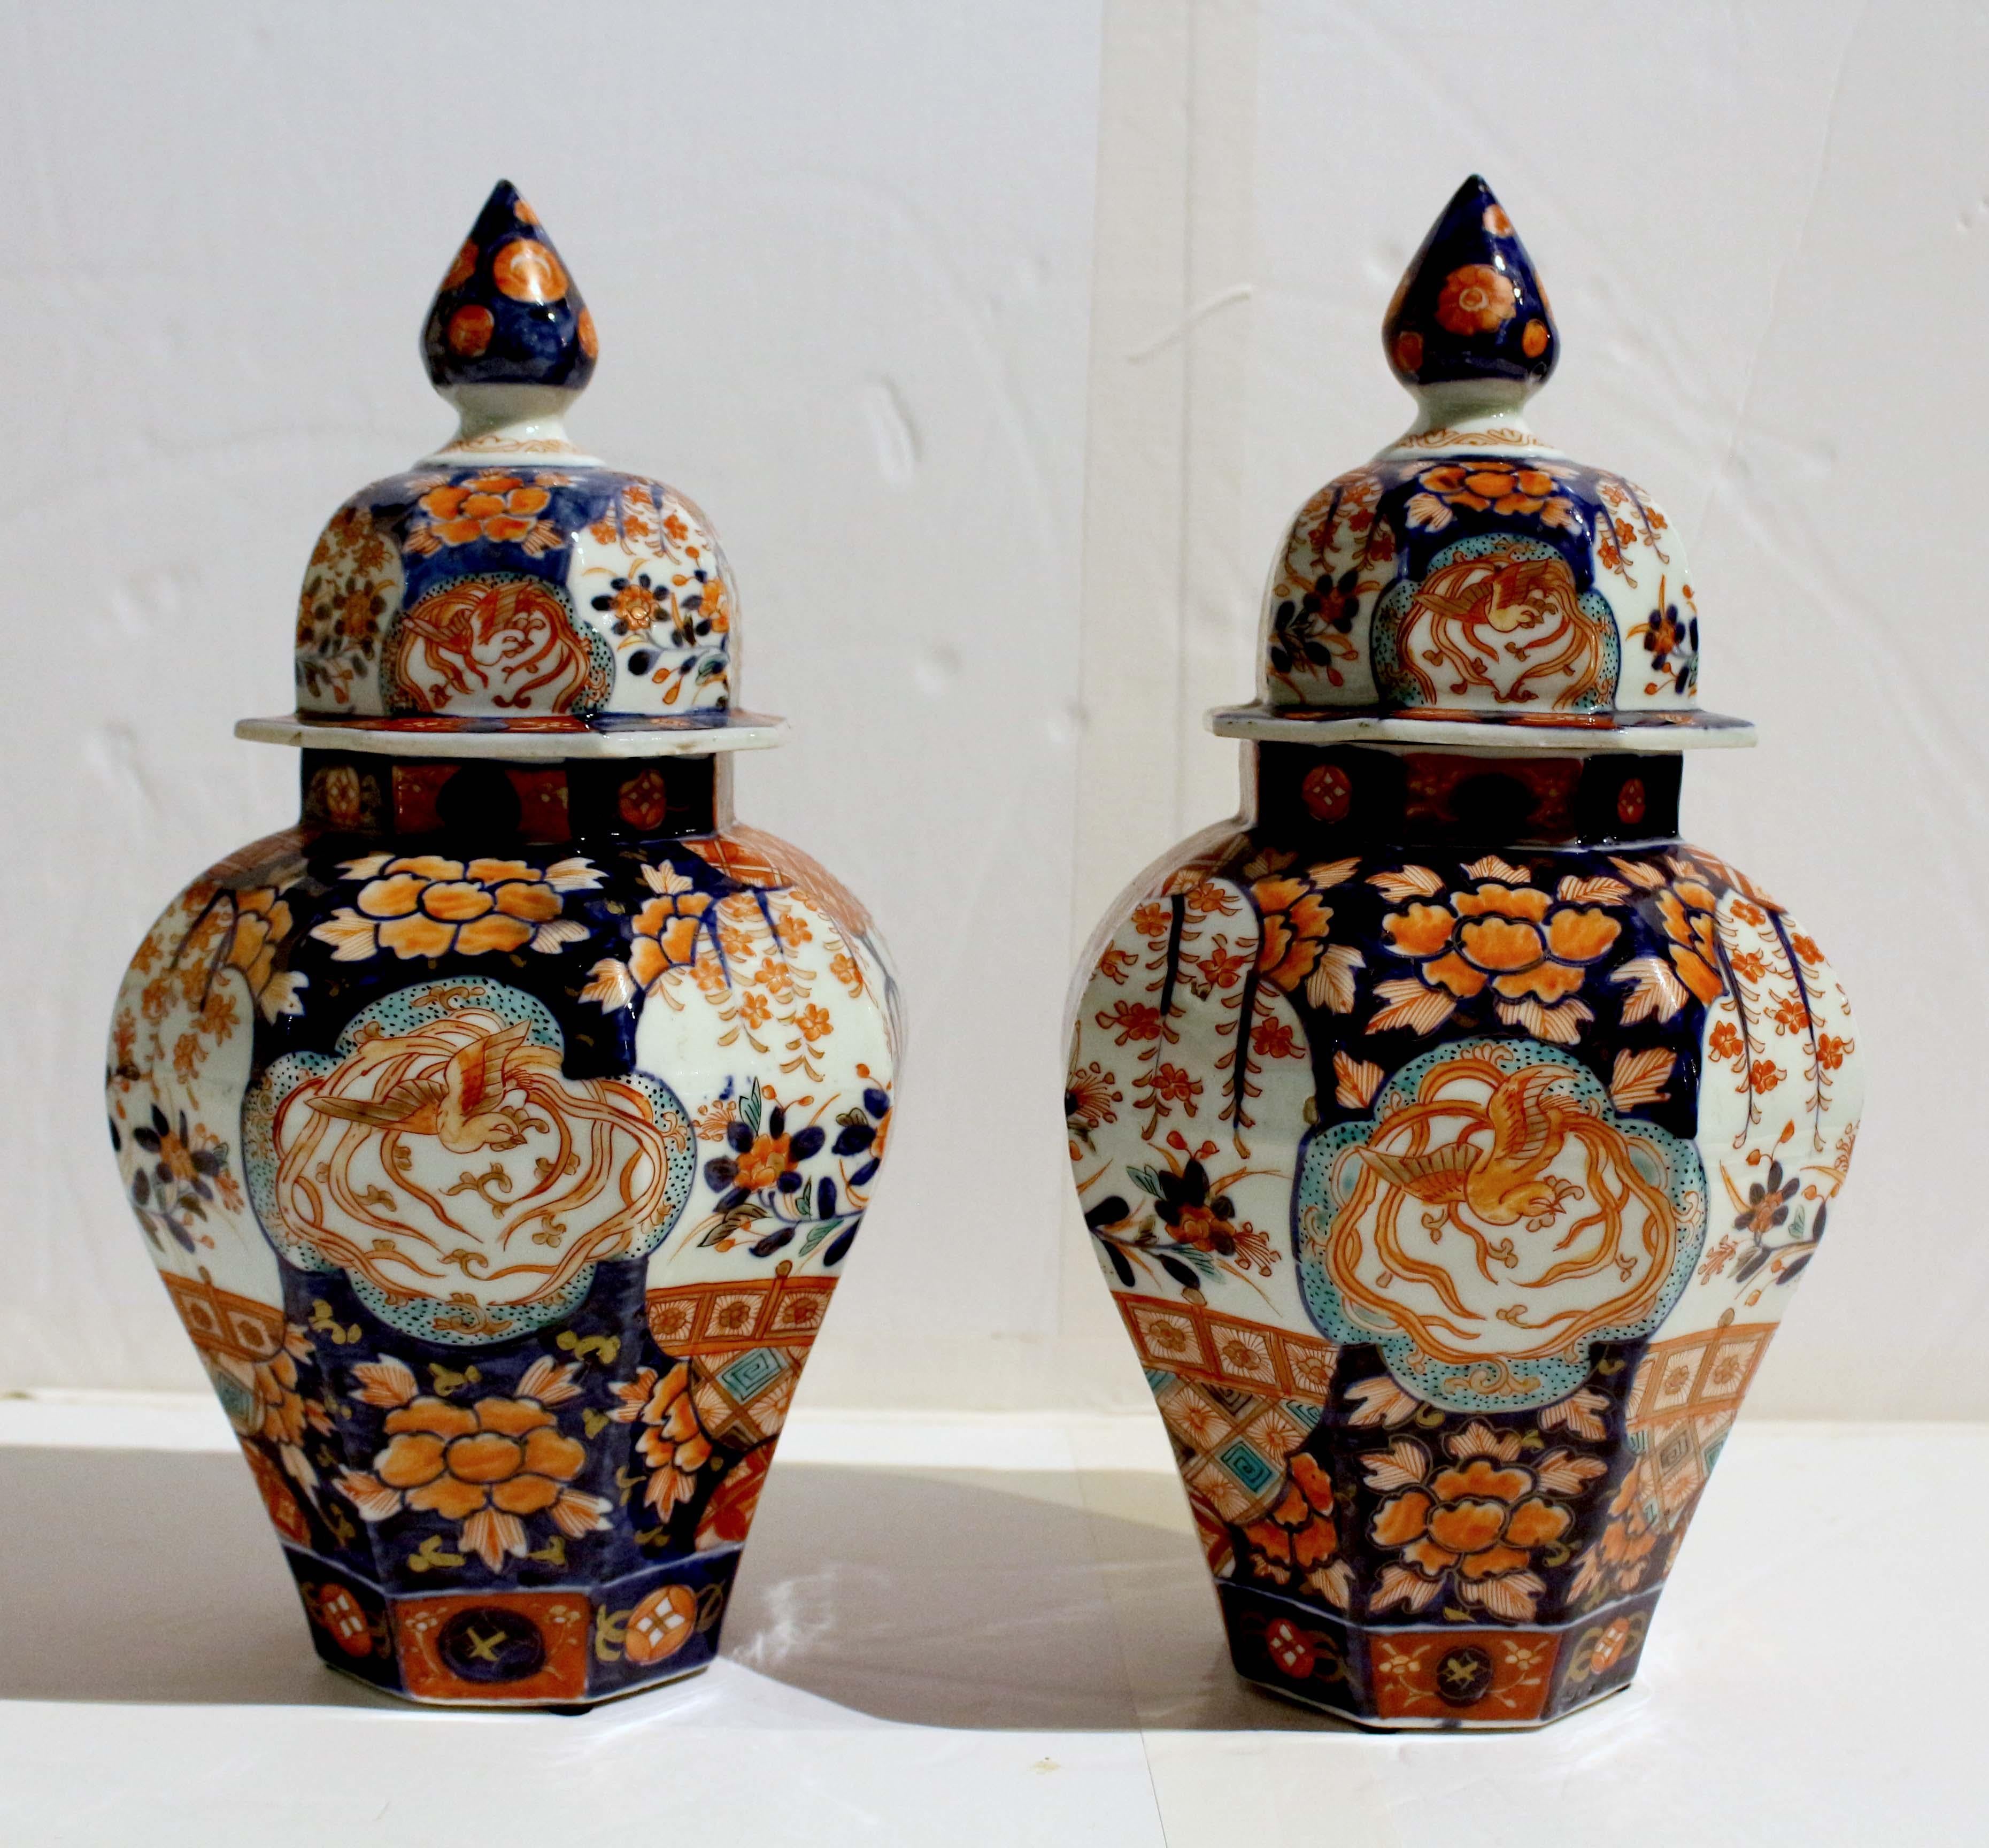 Circa 1860-80 pair of Imari covered jars, Japanese. The lids with finial tops, decorated with phoenix birds & flowers. The jars decorated with large flower vases underneath flowering trees set against geometric designs alternating with cartouches of